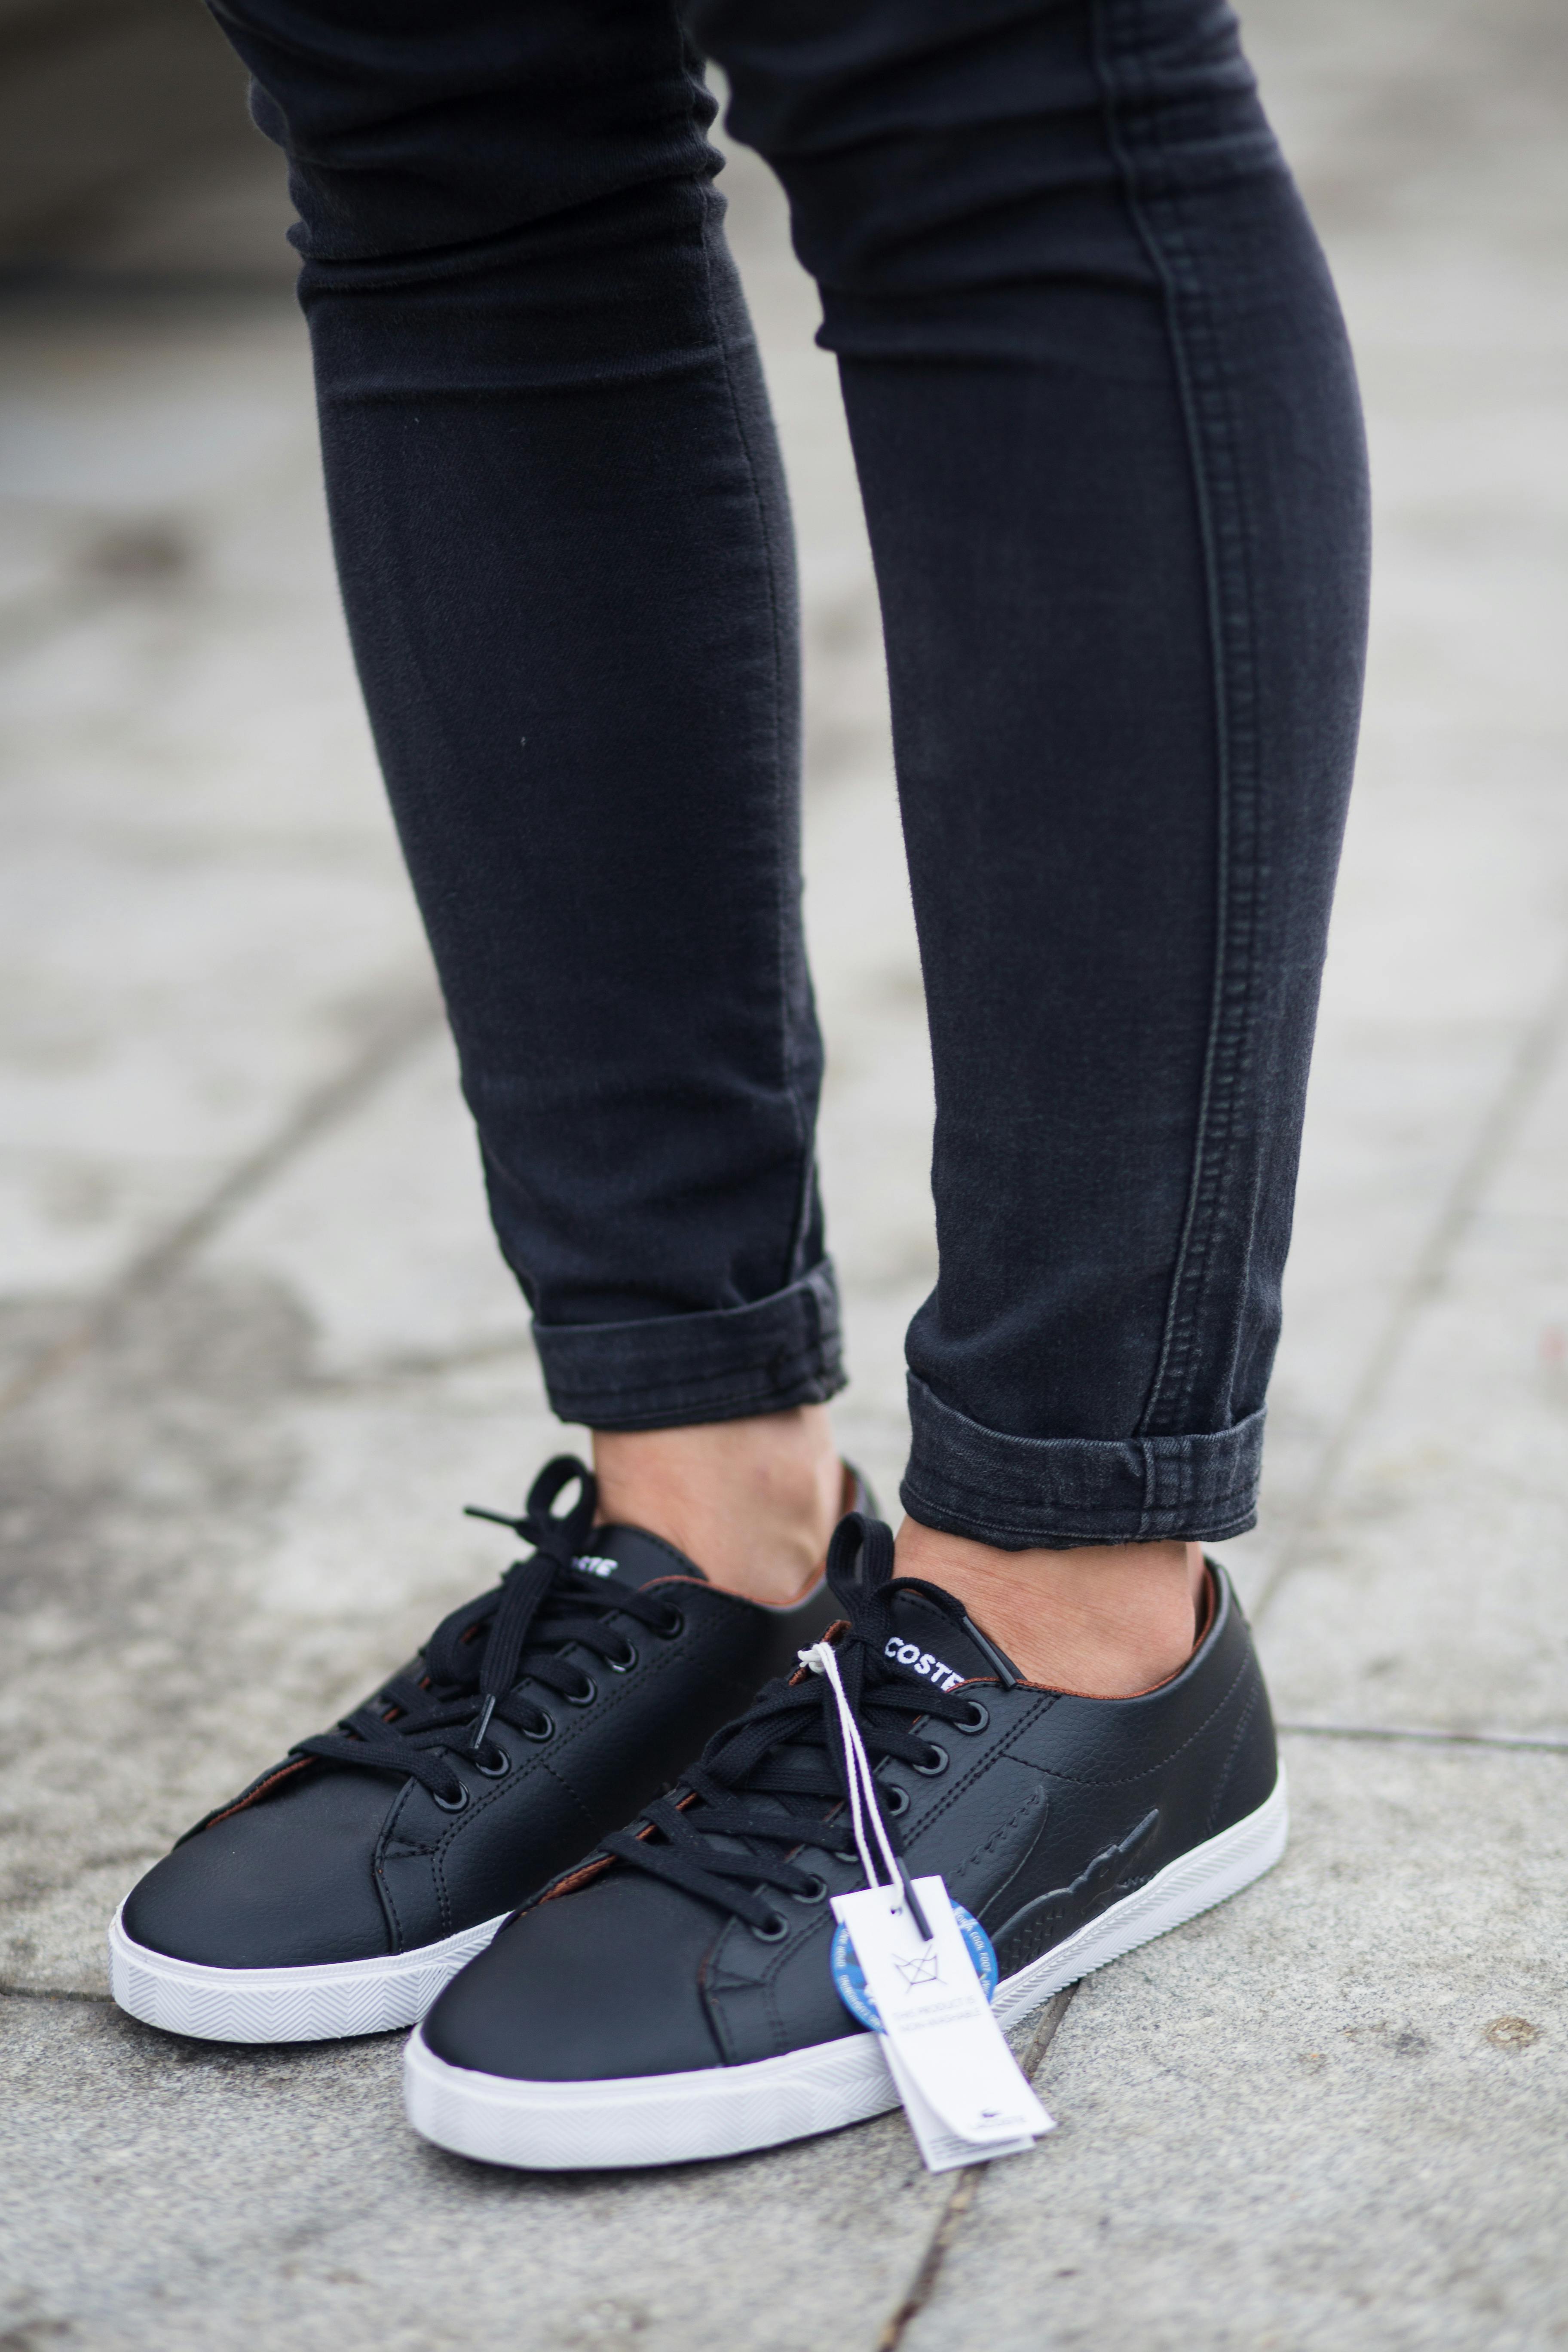 Person Wearing Black Pants And Pair Of Black Sneakers · Free Stock Photo